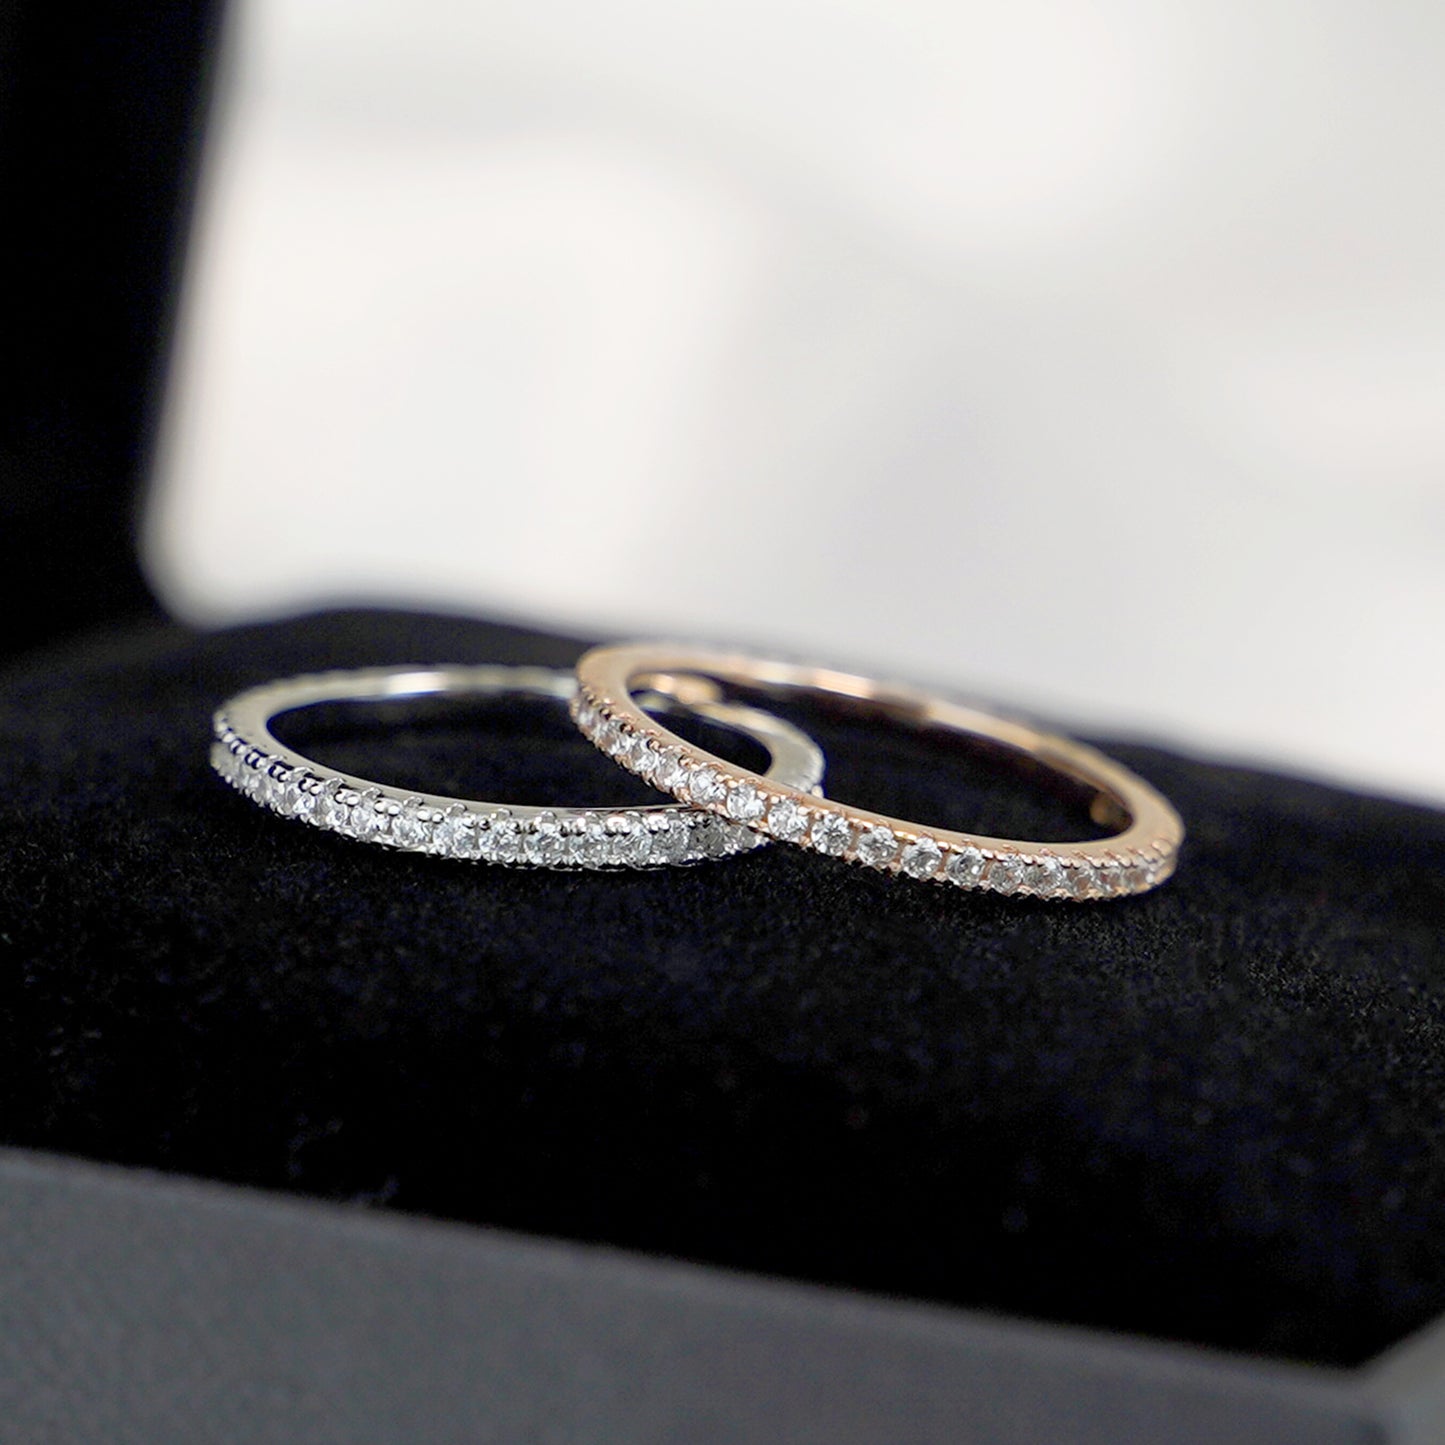 Sterling Silver Full Eternity 1.5mm Pave Set CZ Crystal Stacking Ring I - Q - sugarkittenlondon